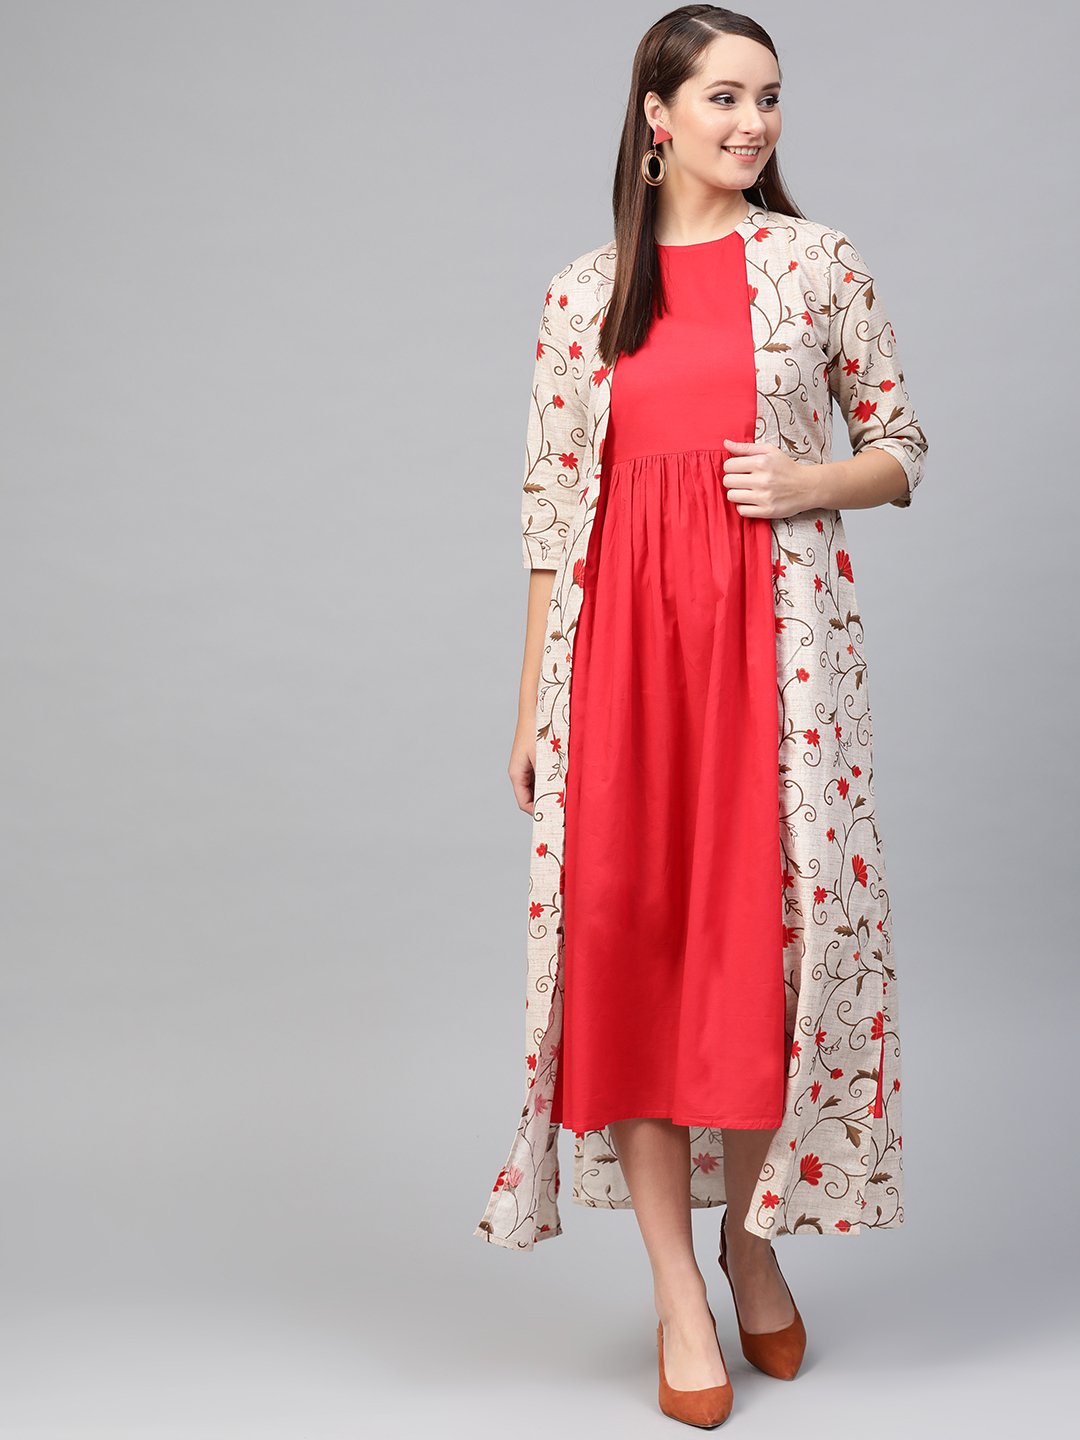 Women's Nayo Red & Beige Floral Printed Maxi Dress - Nayo Clothing